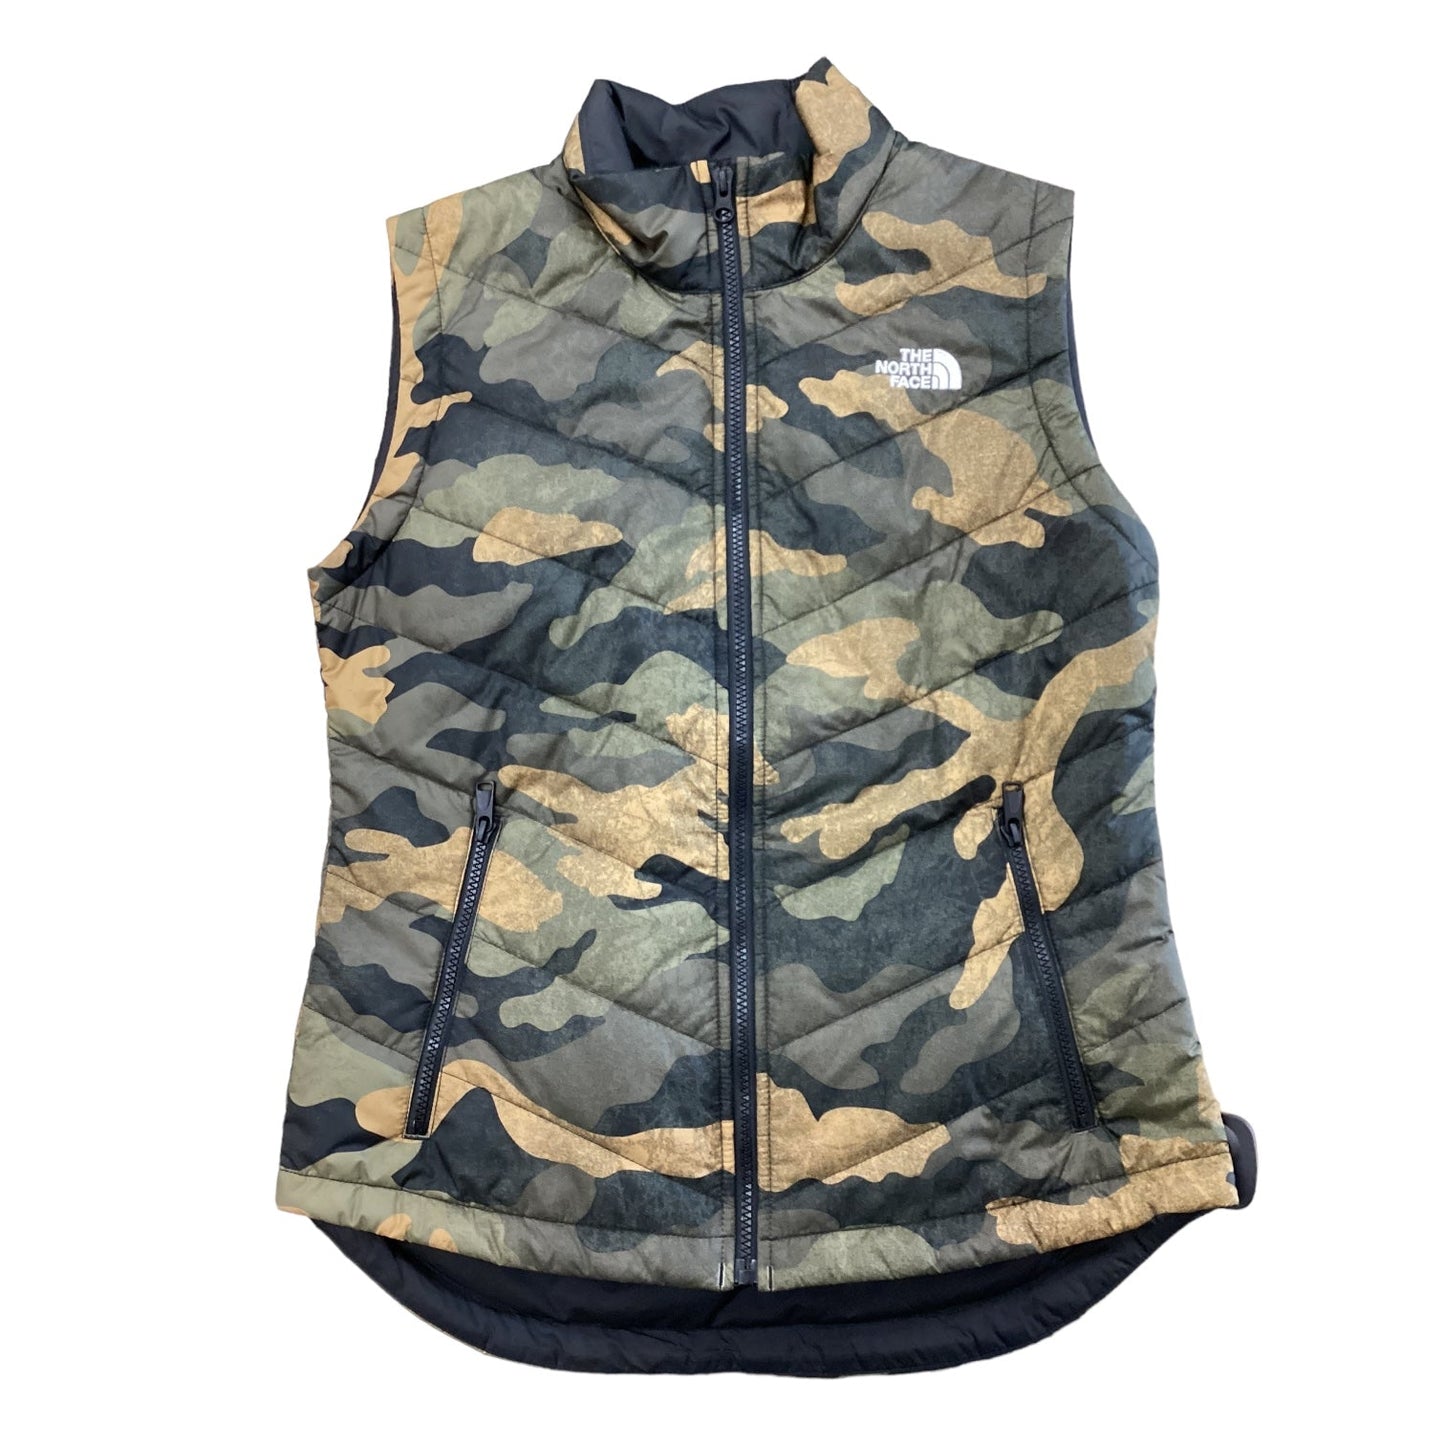 Camouflage Print Vest Puffer & Quilted The North Face, Size S